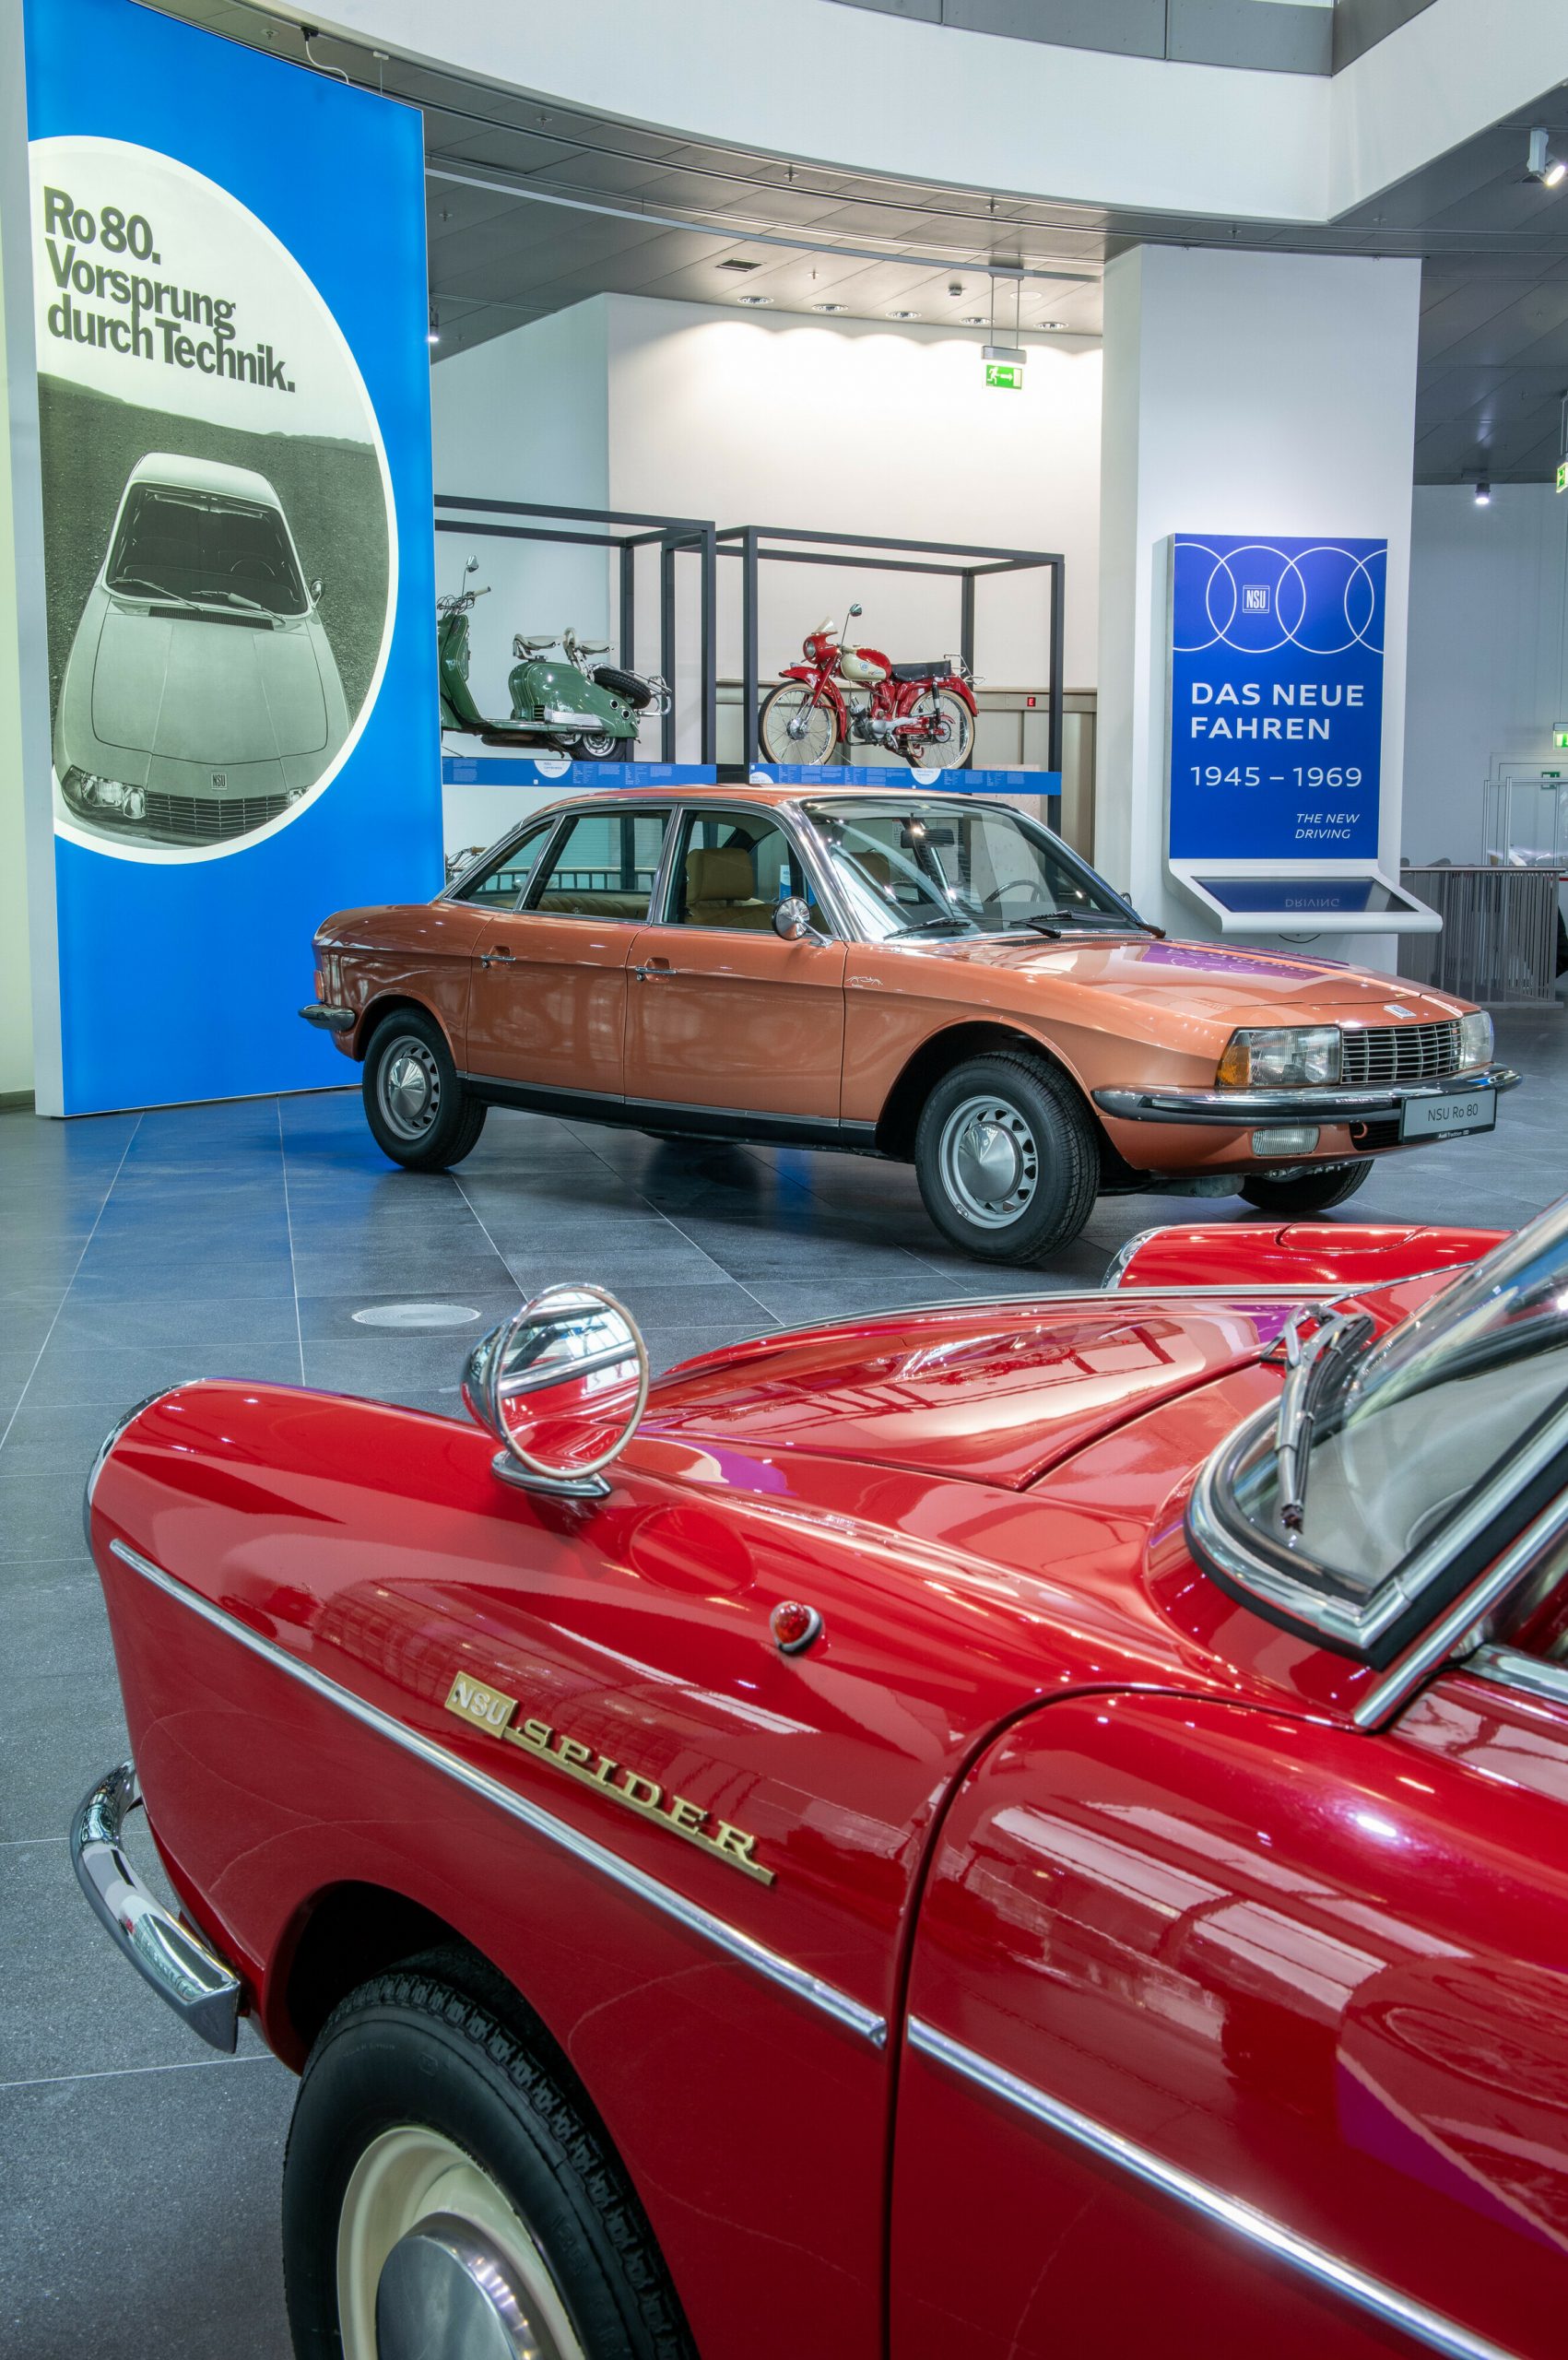 Impression from the new special exhibition Der fünfte Ring at the Audi museum mobile: NSU/Wankel Spider was the first car in the world to be driven with a rotary piston motor as standard. In the background, theres a Ro 80.